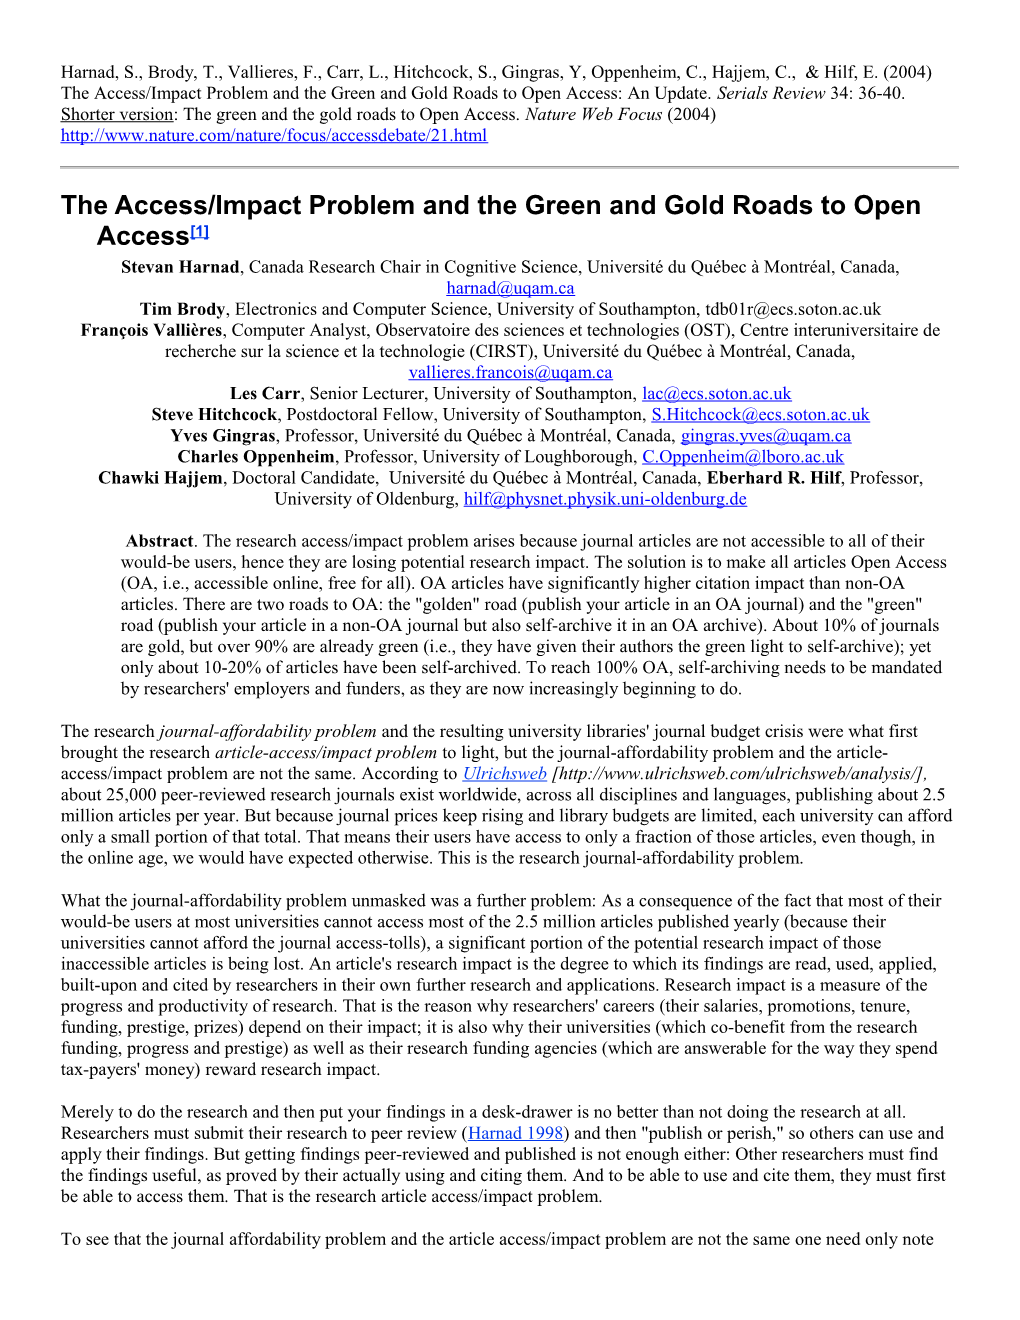 The Access/Impact Problem and the Green and Gold Roads to Open Access 1